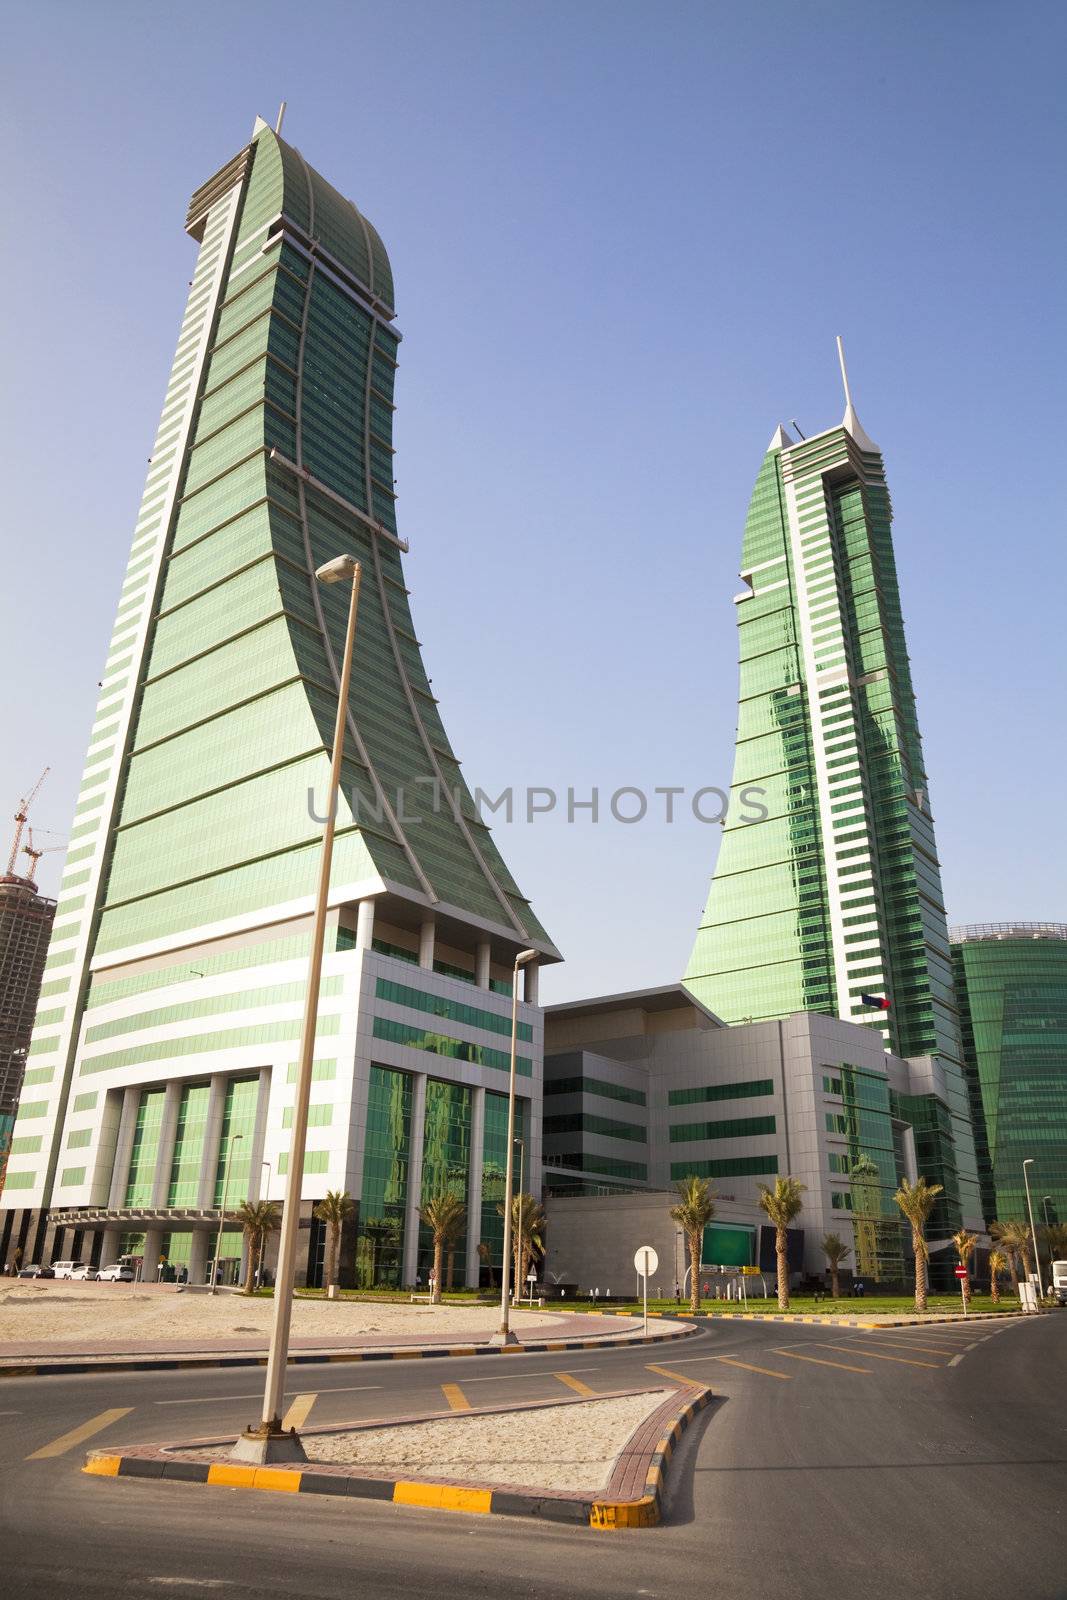 Financial Harbour Towers, Manama, Bahrain by shariffc